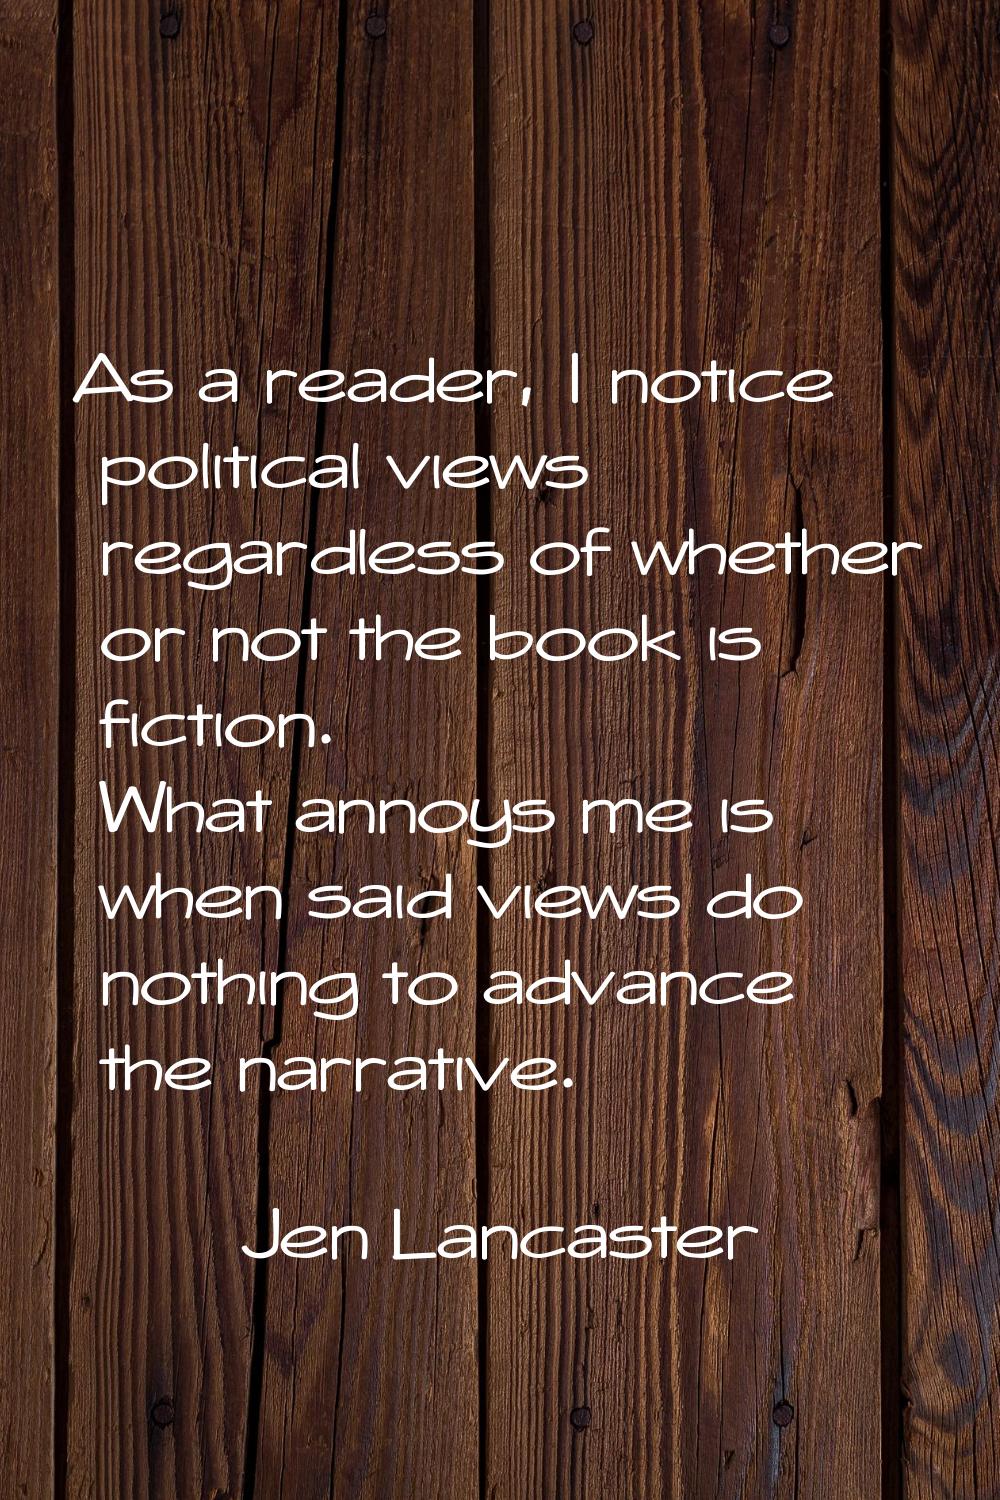 As a reader, I notice political views regardless of whether or not the book is fiction. What annoys